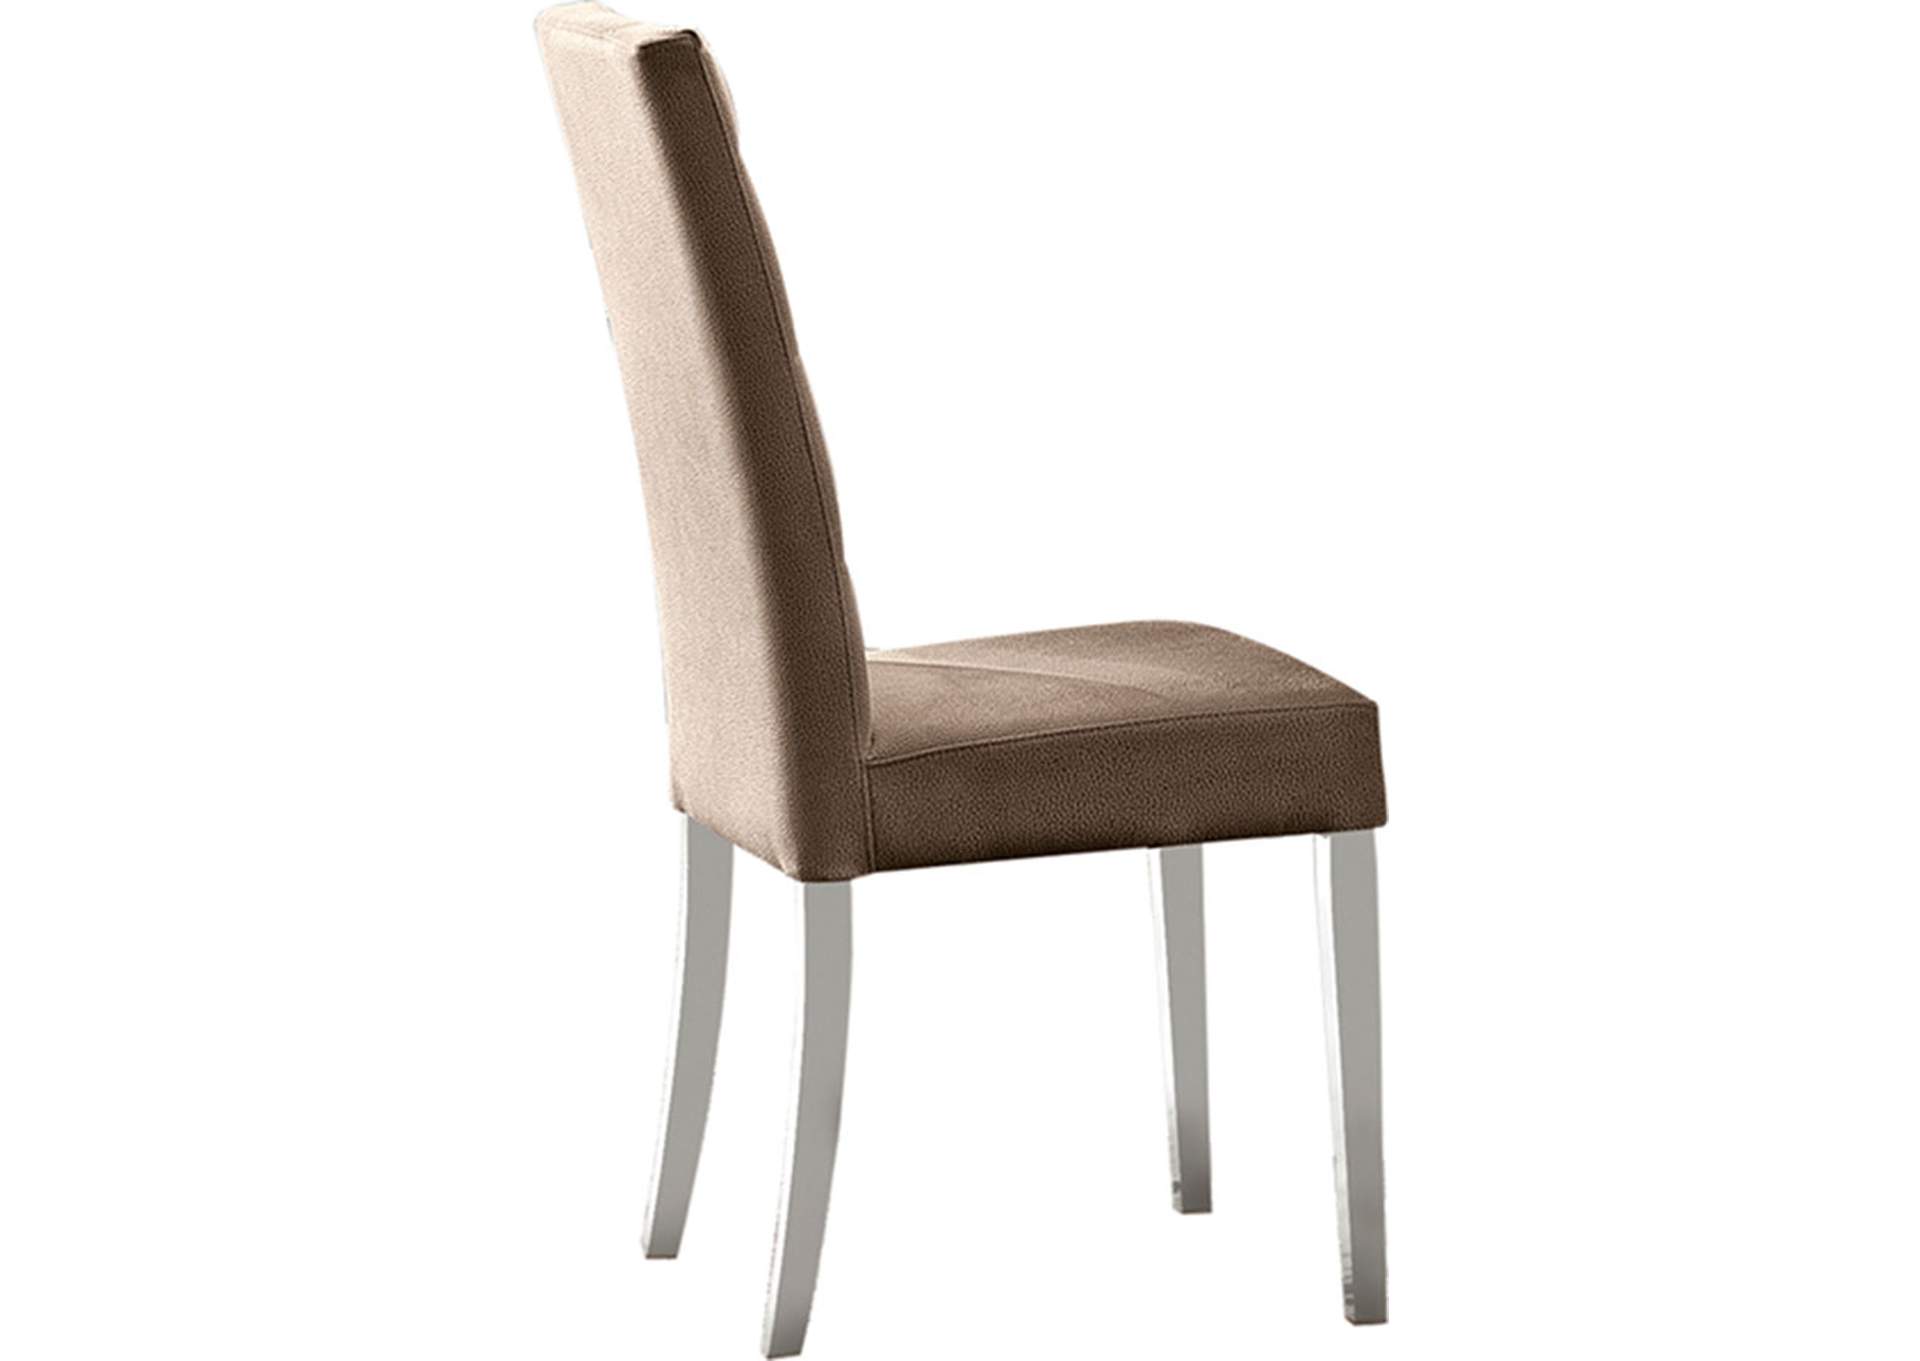 Dama Bianca Side Chair In Eco-leather,ESF Wholesale Furniture